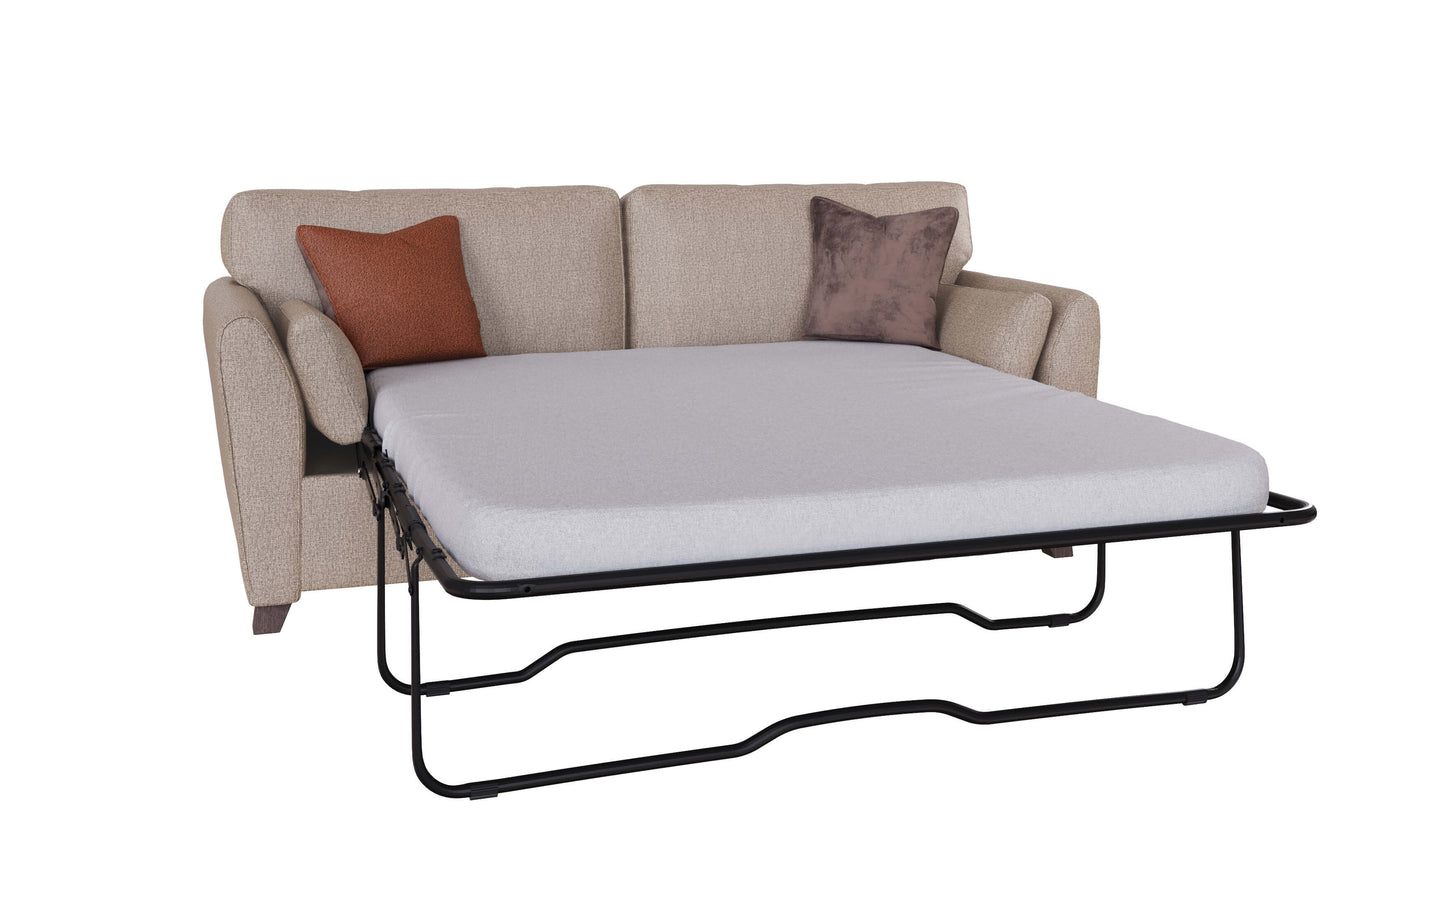 Cantrell Sofa Bed - Biscuit